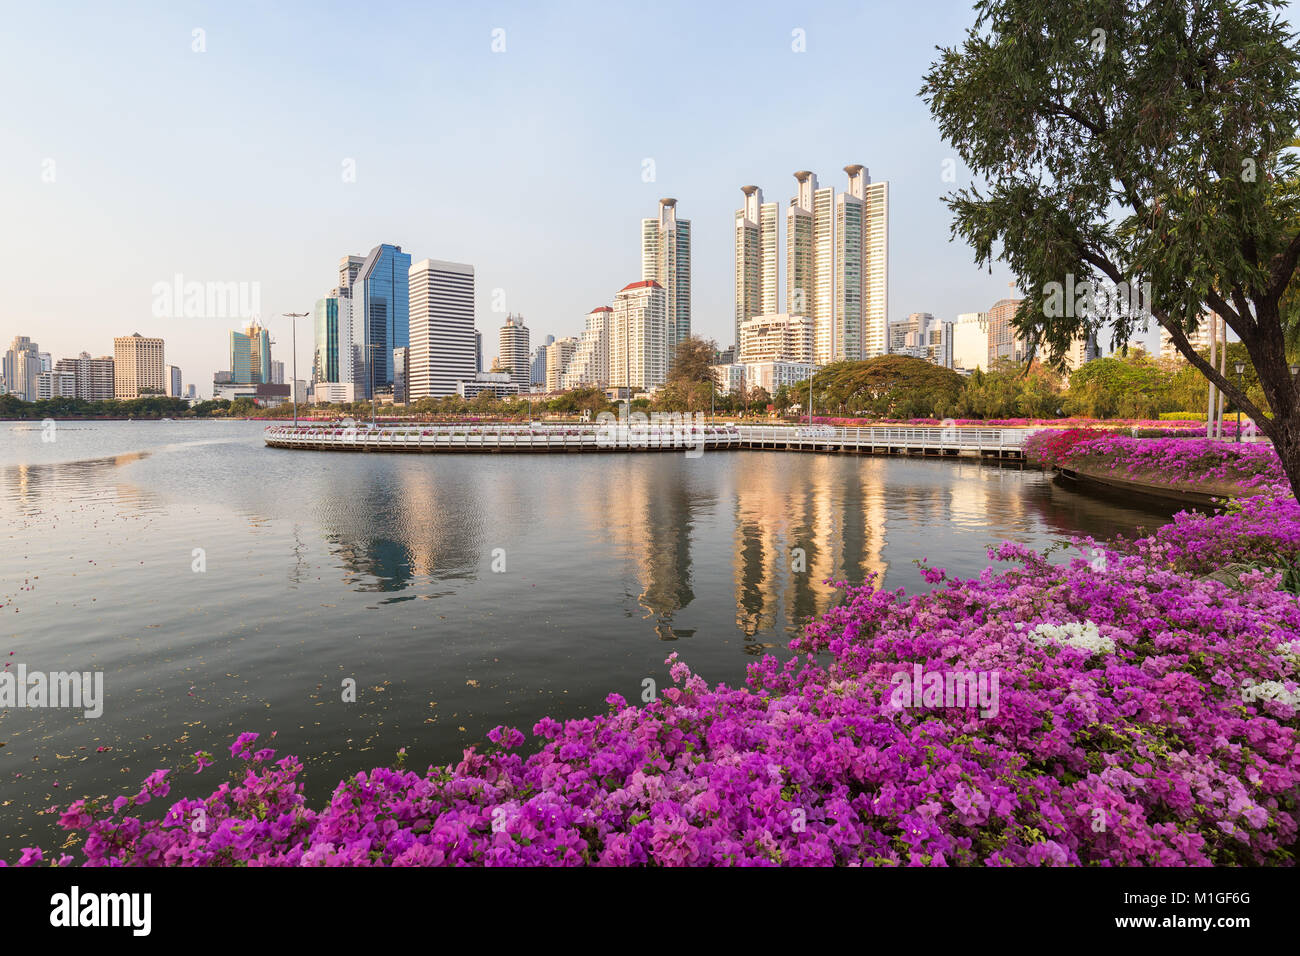 Blooming flowerbeds at the Benjakiti (Benjakitti) Park and modern skyscrapers in Bangkok, Thailand, in the morning. Stock Photo